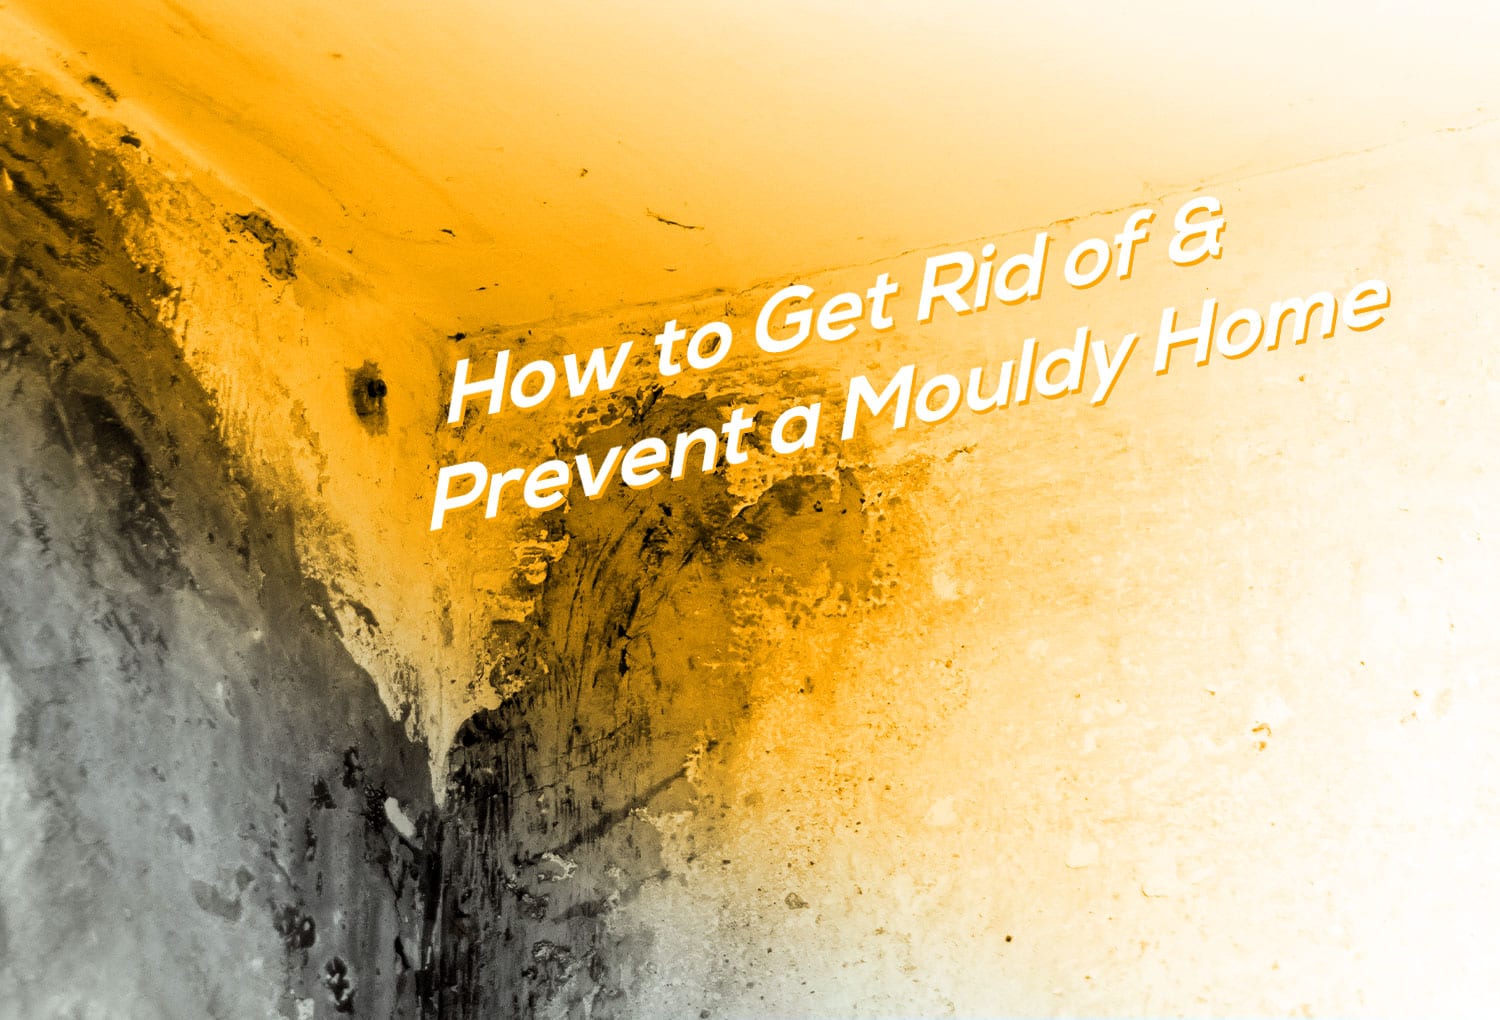 How-to-Get-Rid-of-and-Prevent-a-Mouldy-Home